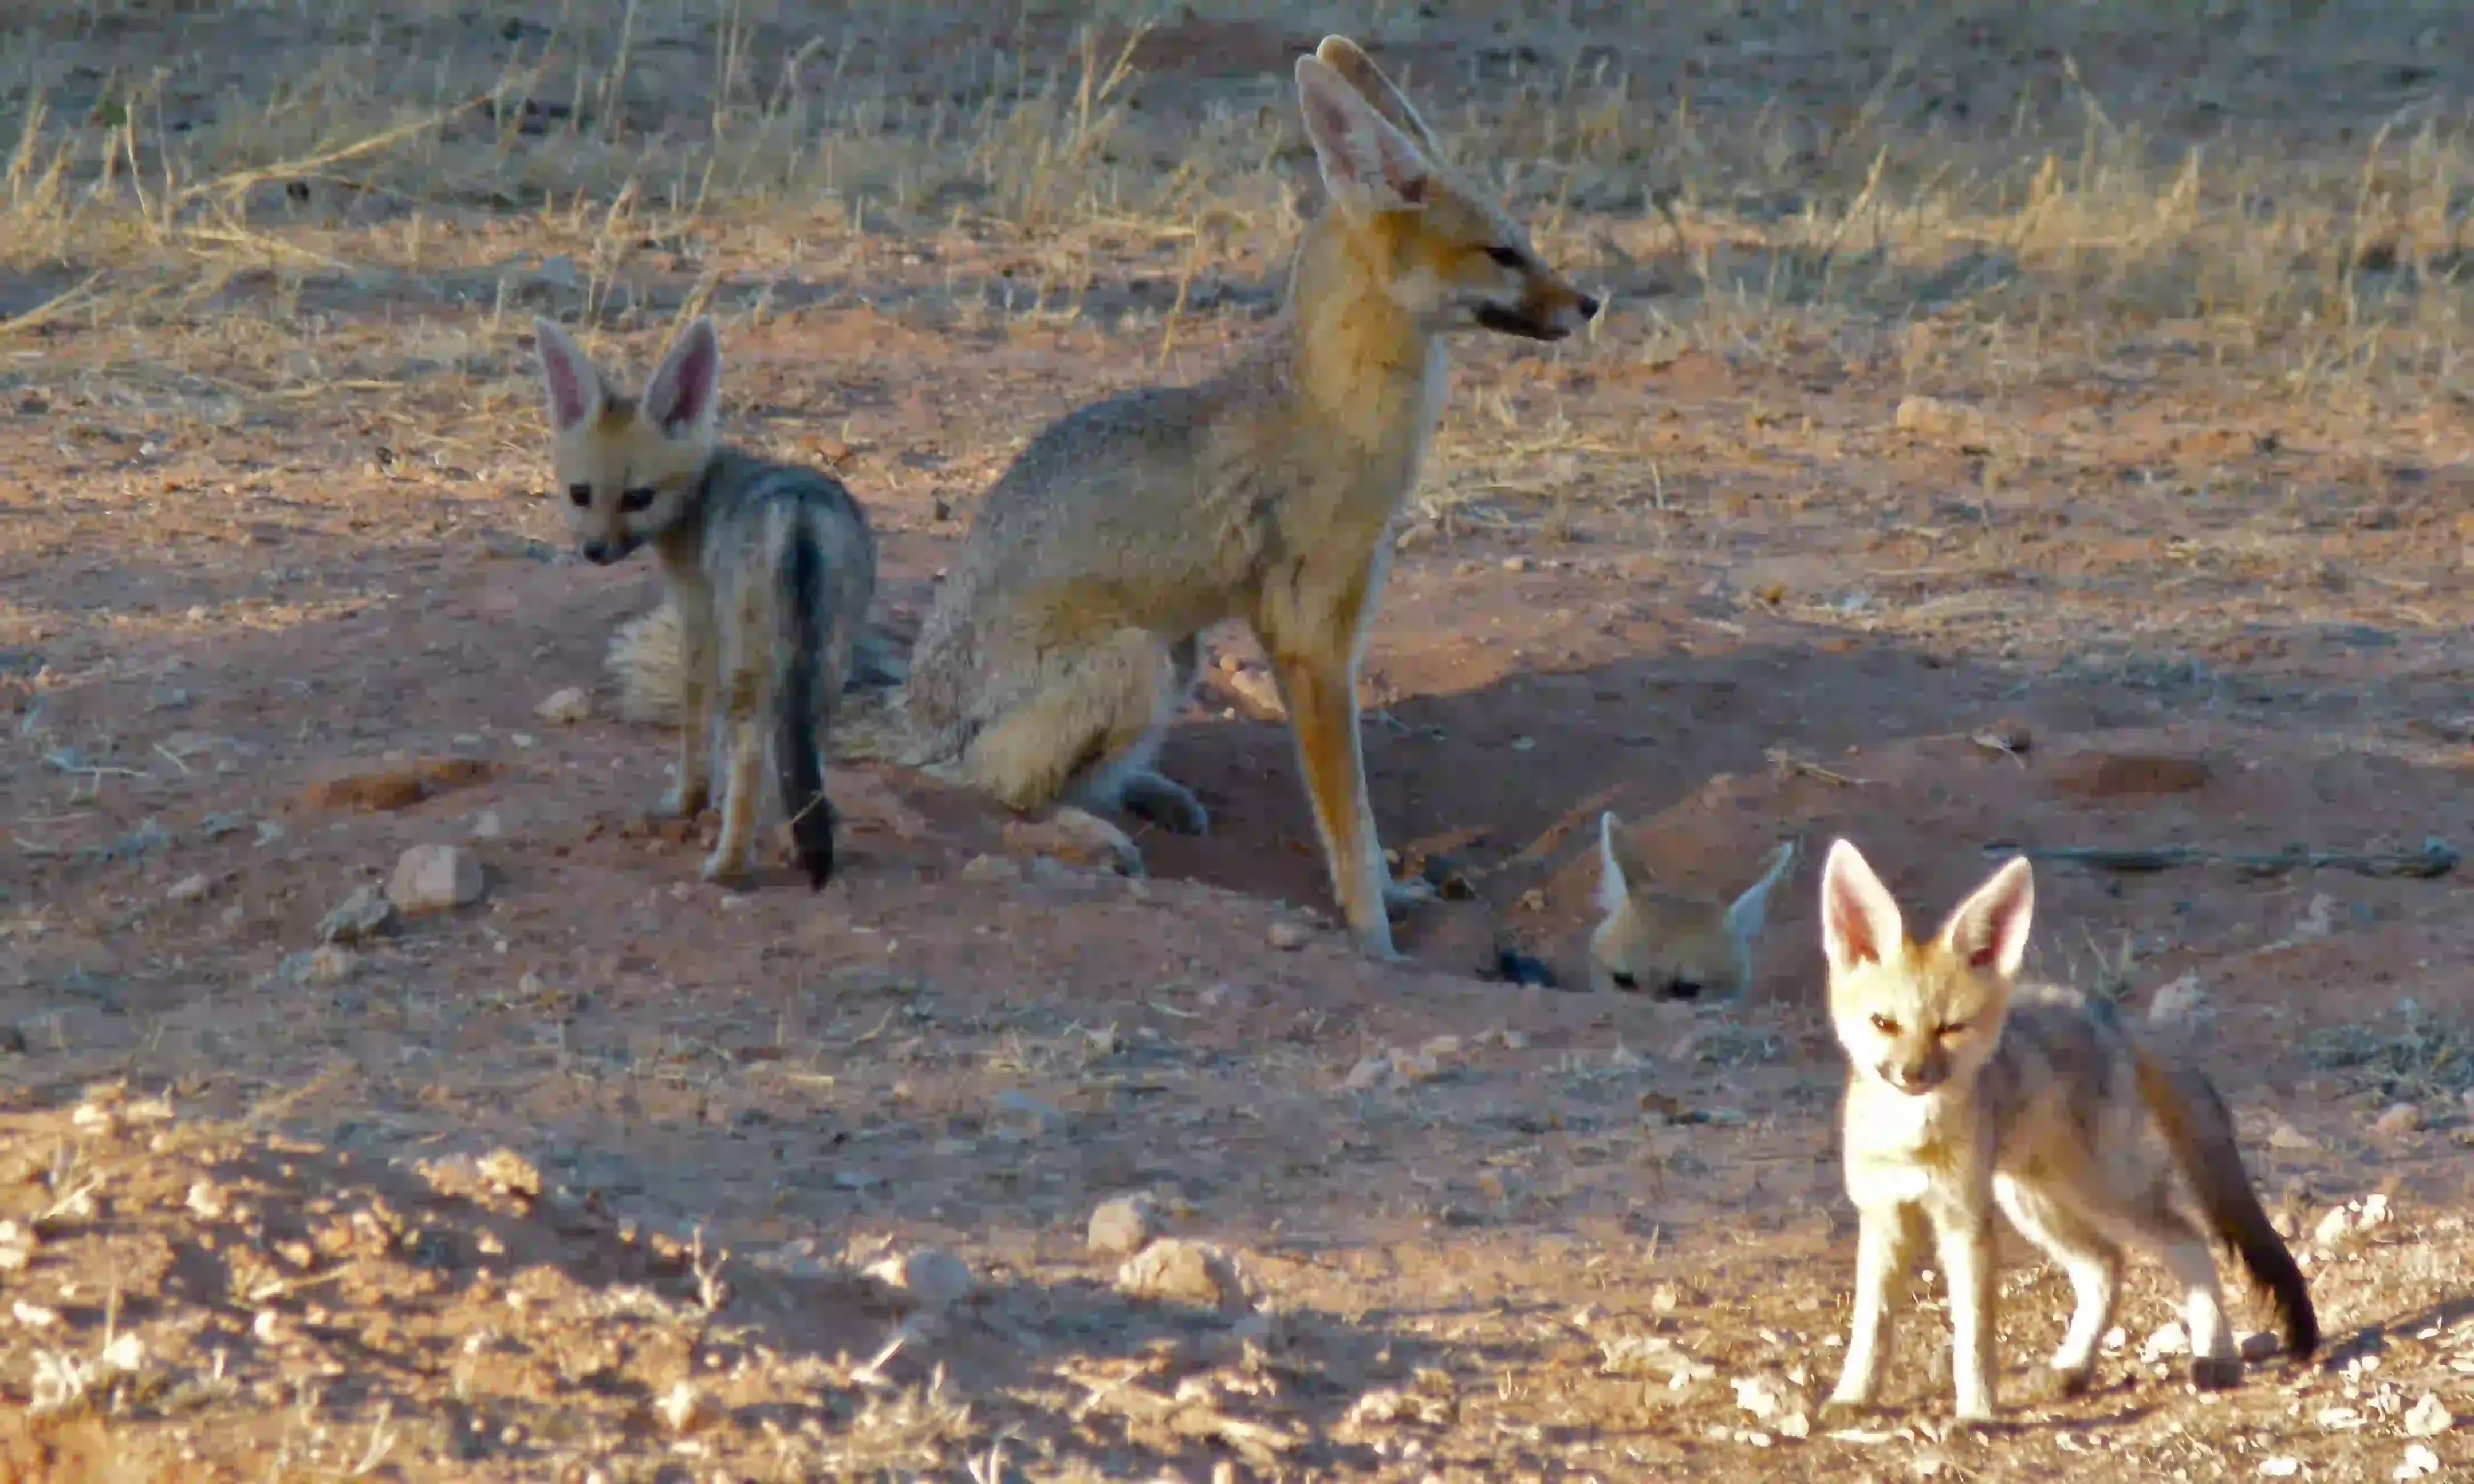 Three young Cubs of Cape fox